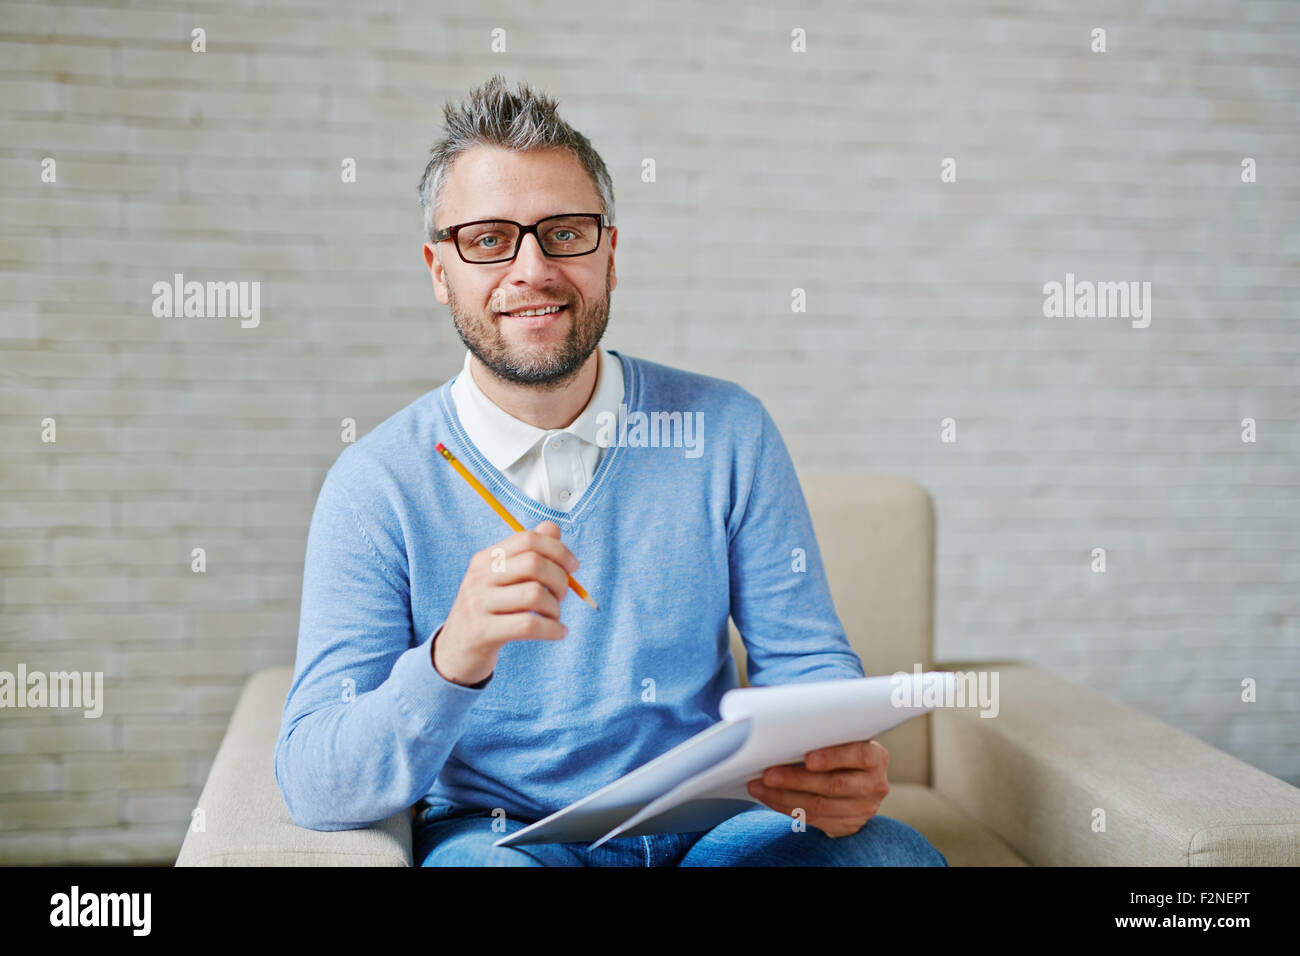 Male psychiatrist with pencil and clipboard looking at camera Stock Photo